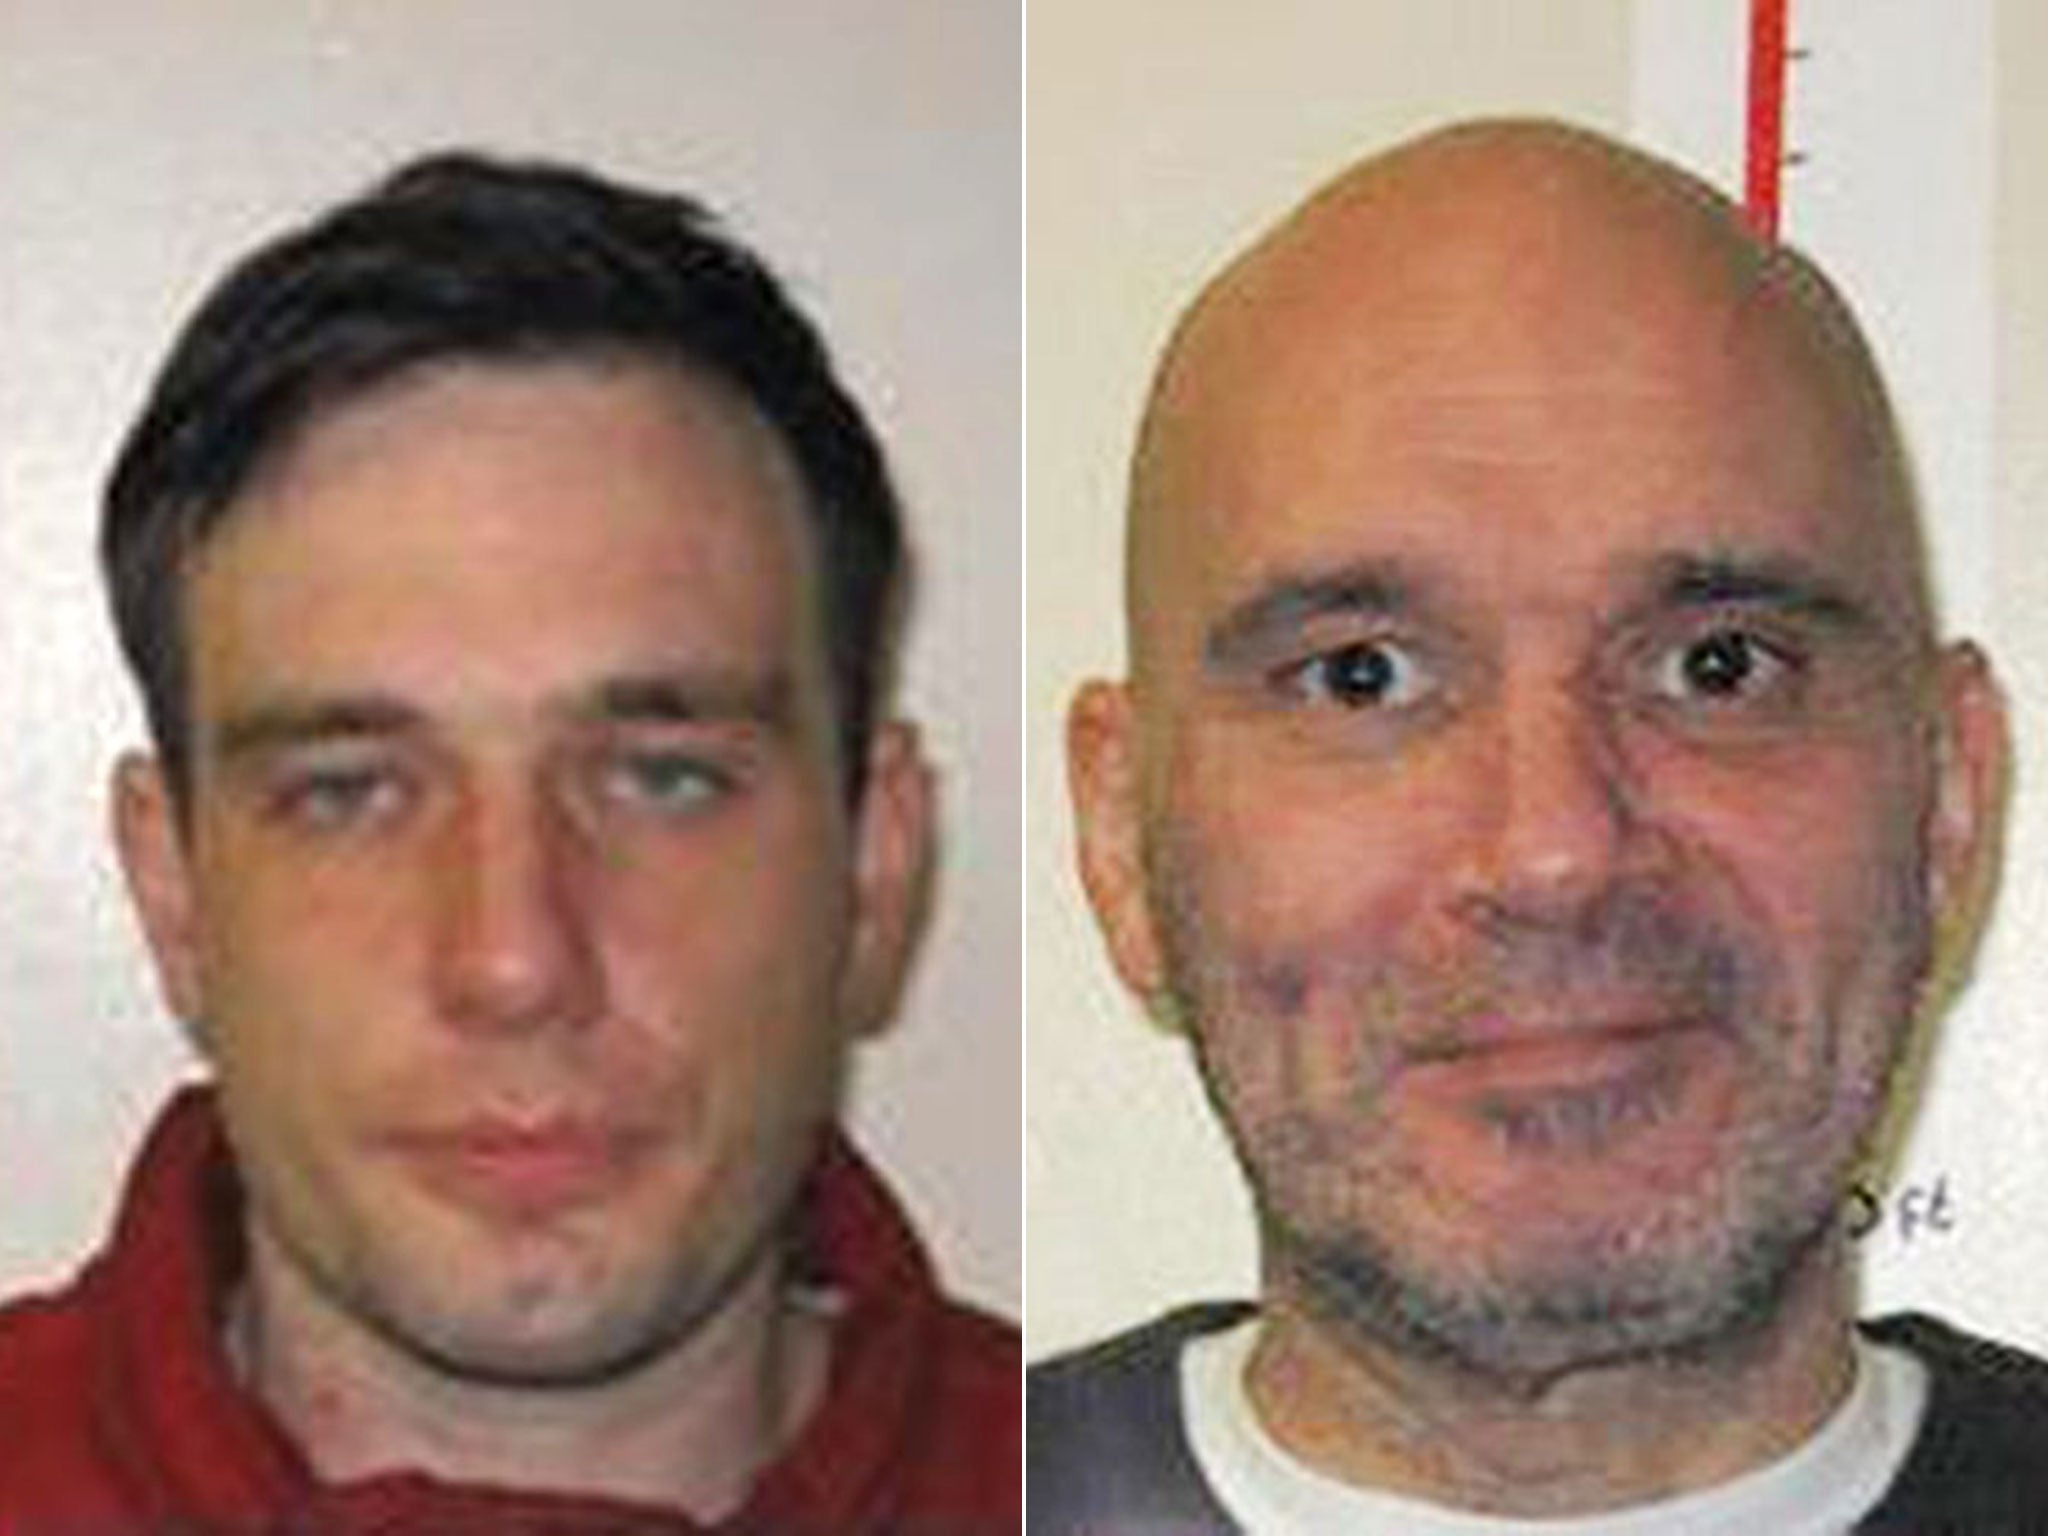 Lewis Powter, left, failed to return to HMP Hollesley Bay on Sunday night. Paul Oddysses had absconded from the same prison the day before